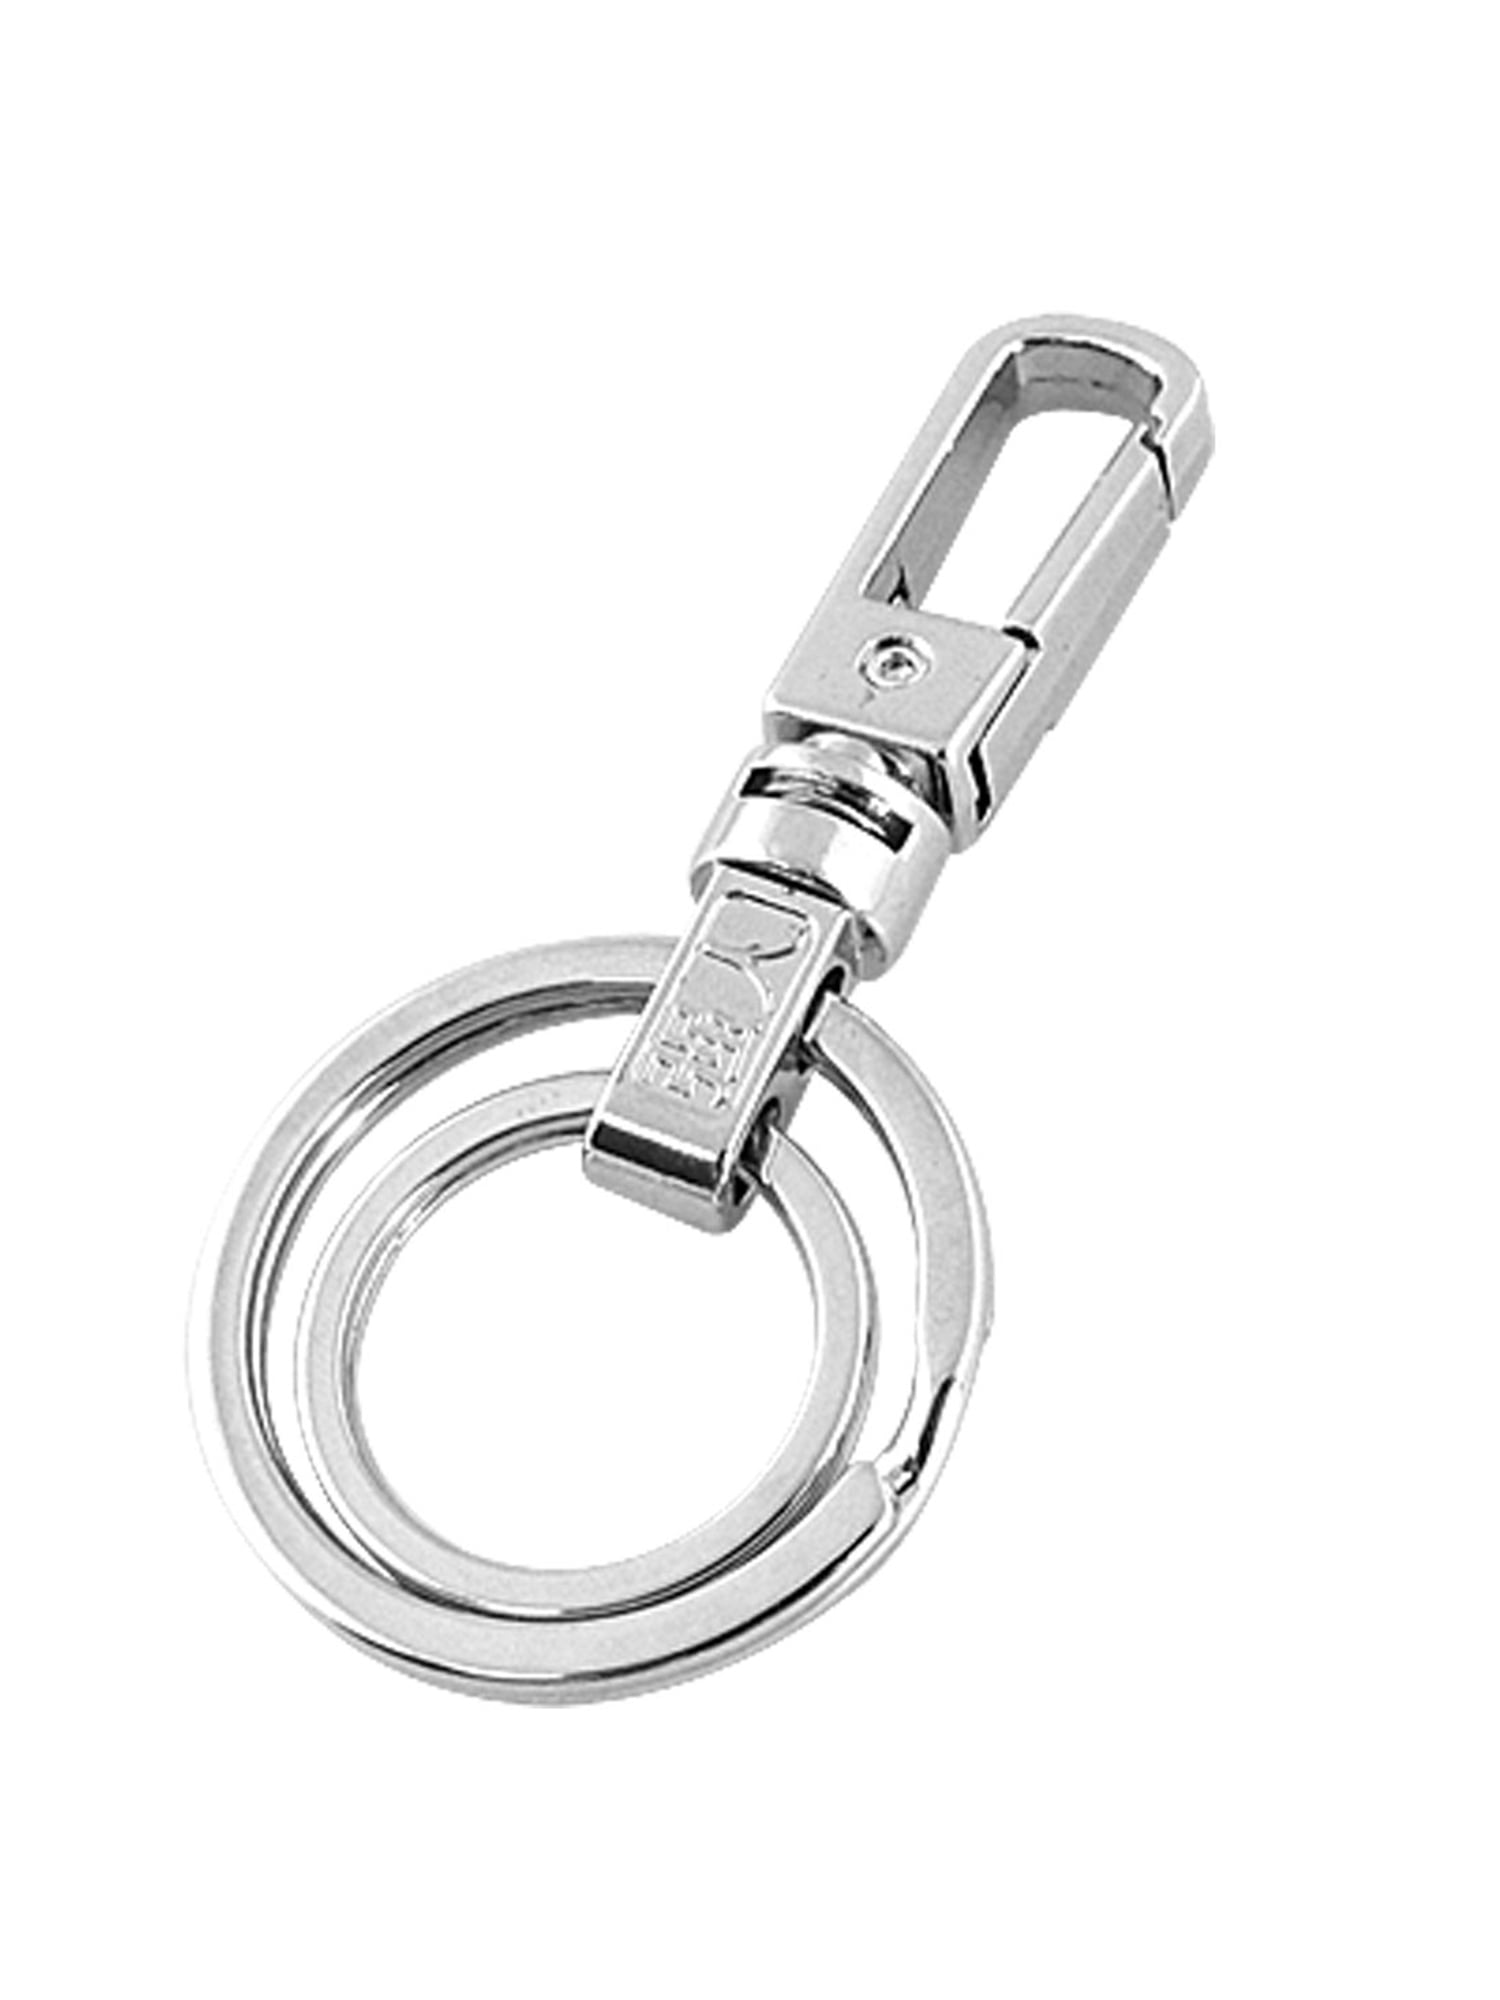 bronze or silver tone alloy 3 styles Double ring keyring with snap clasp 